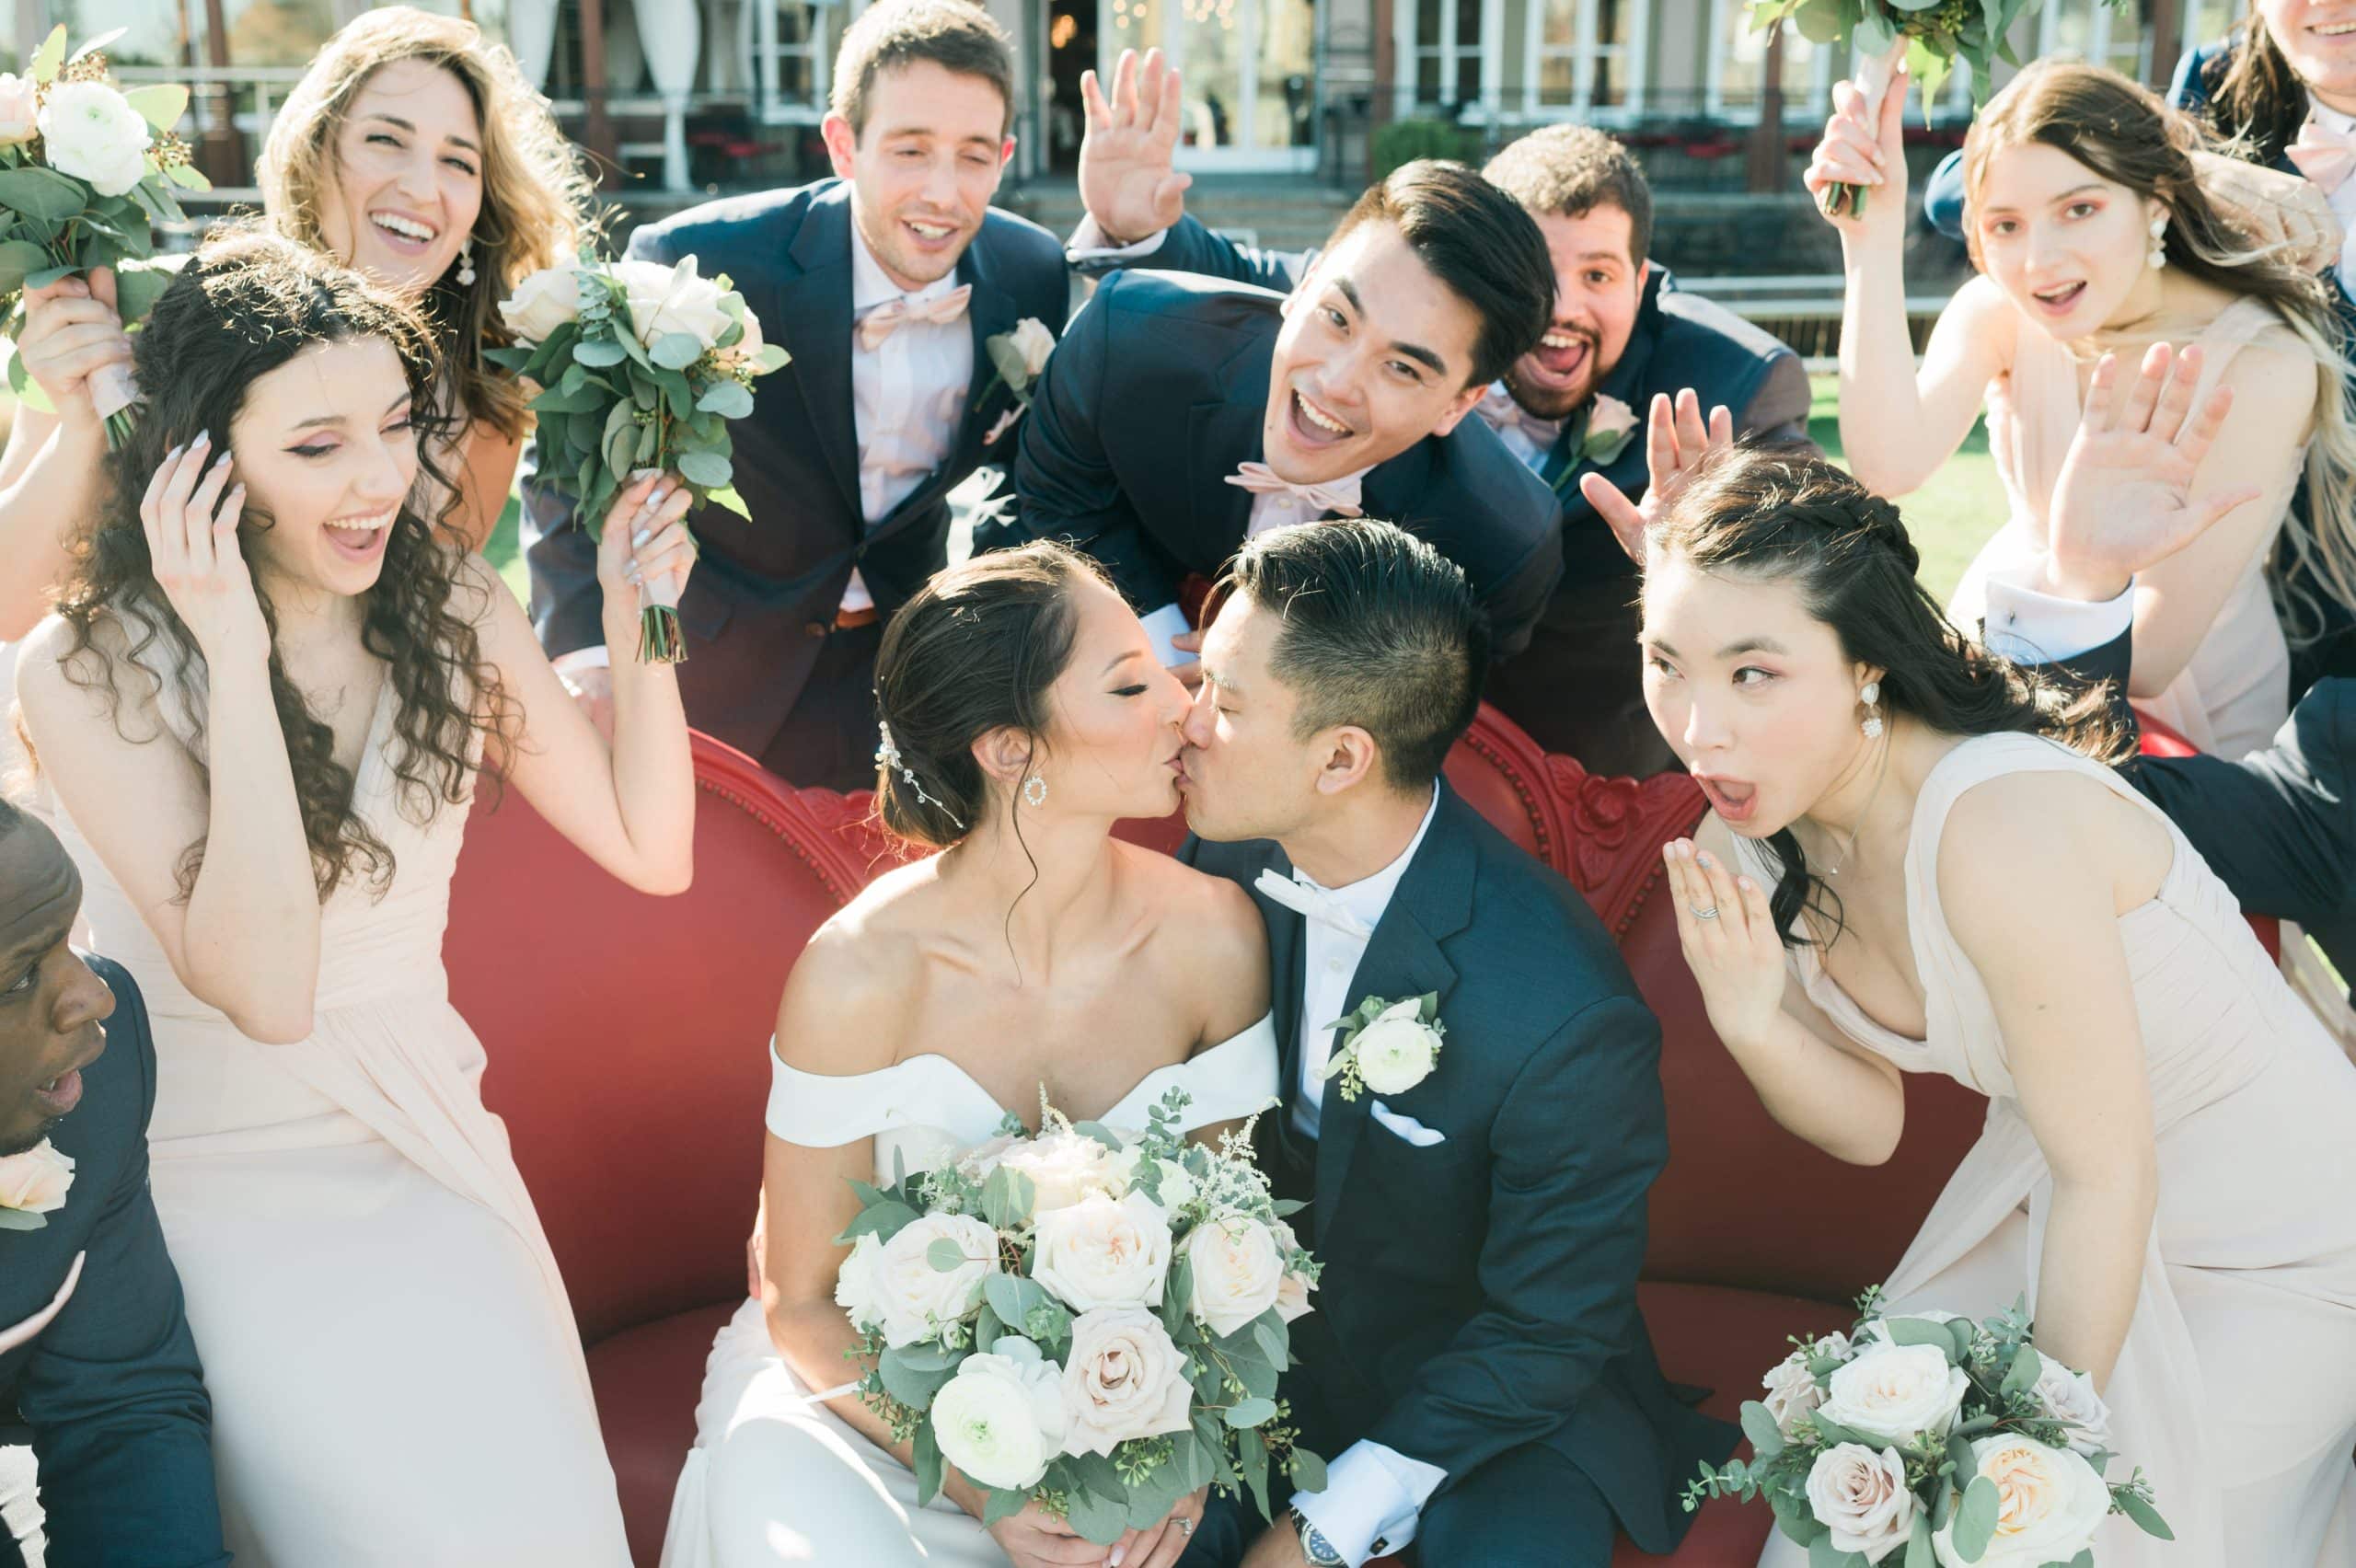 LIberty House wedding in Jersey City, captured by North Jersey wedding photographer Ben Lau.